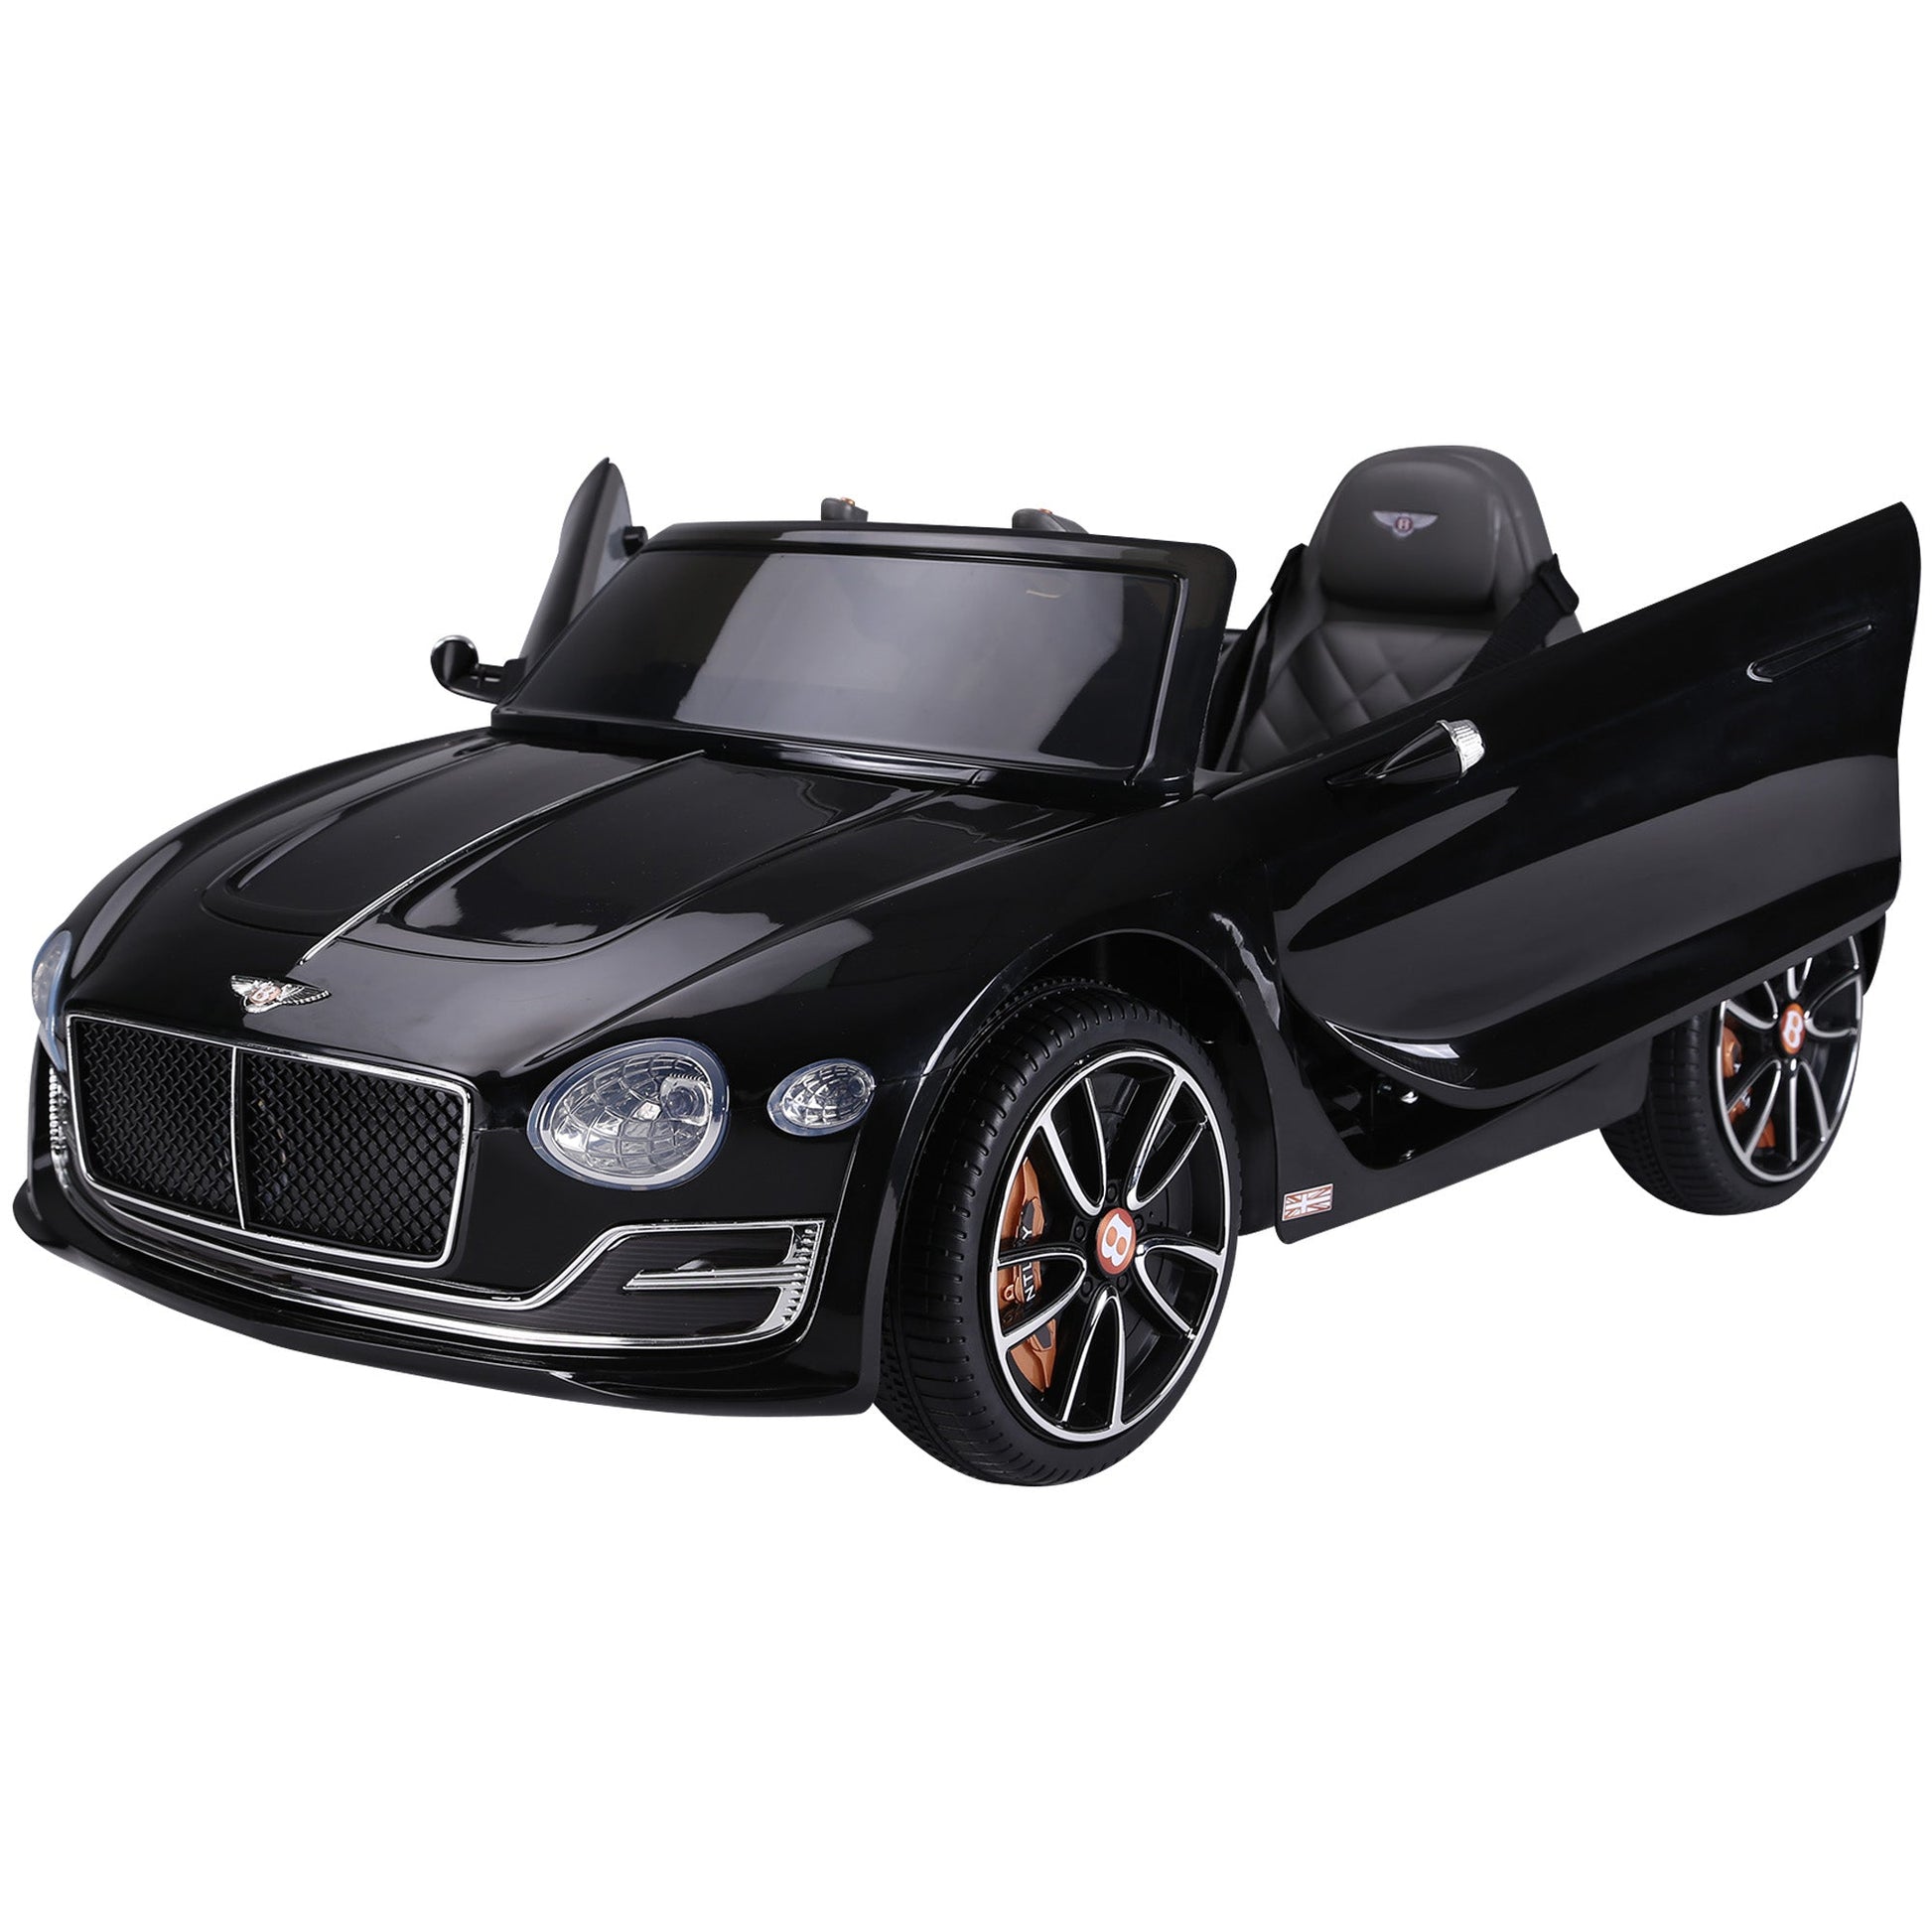 Maplin Plus Bentley GT 12V Electric Kids Ride On Toy Car with LEDs, Music & Remote Control for 3-8 Years - Black - maplin.co.uk